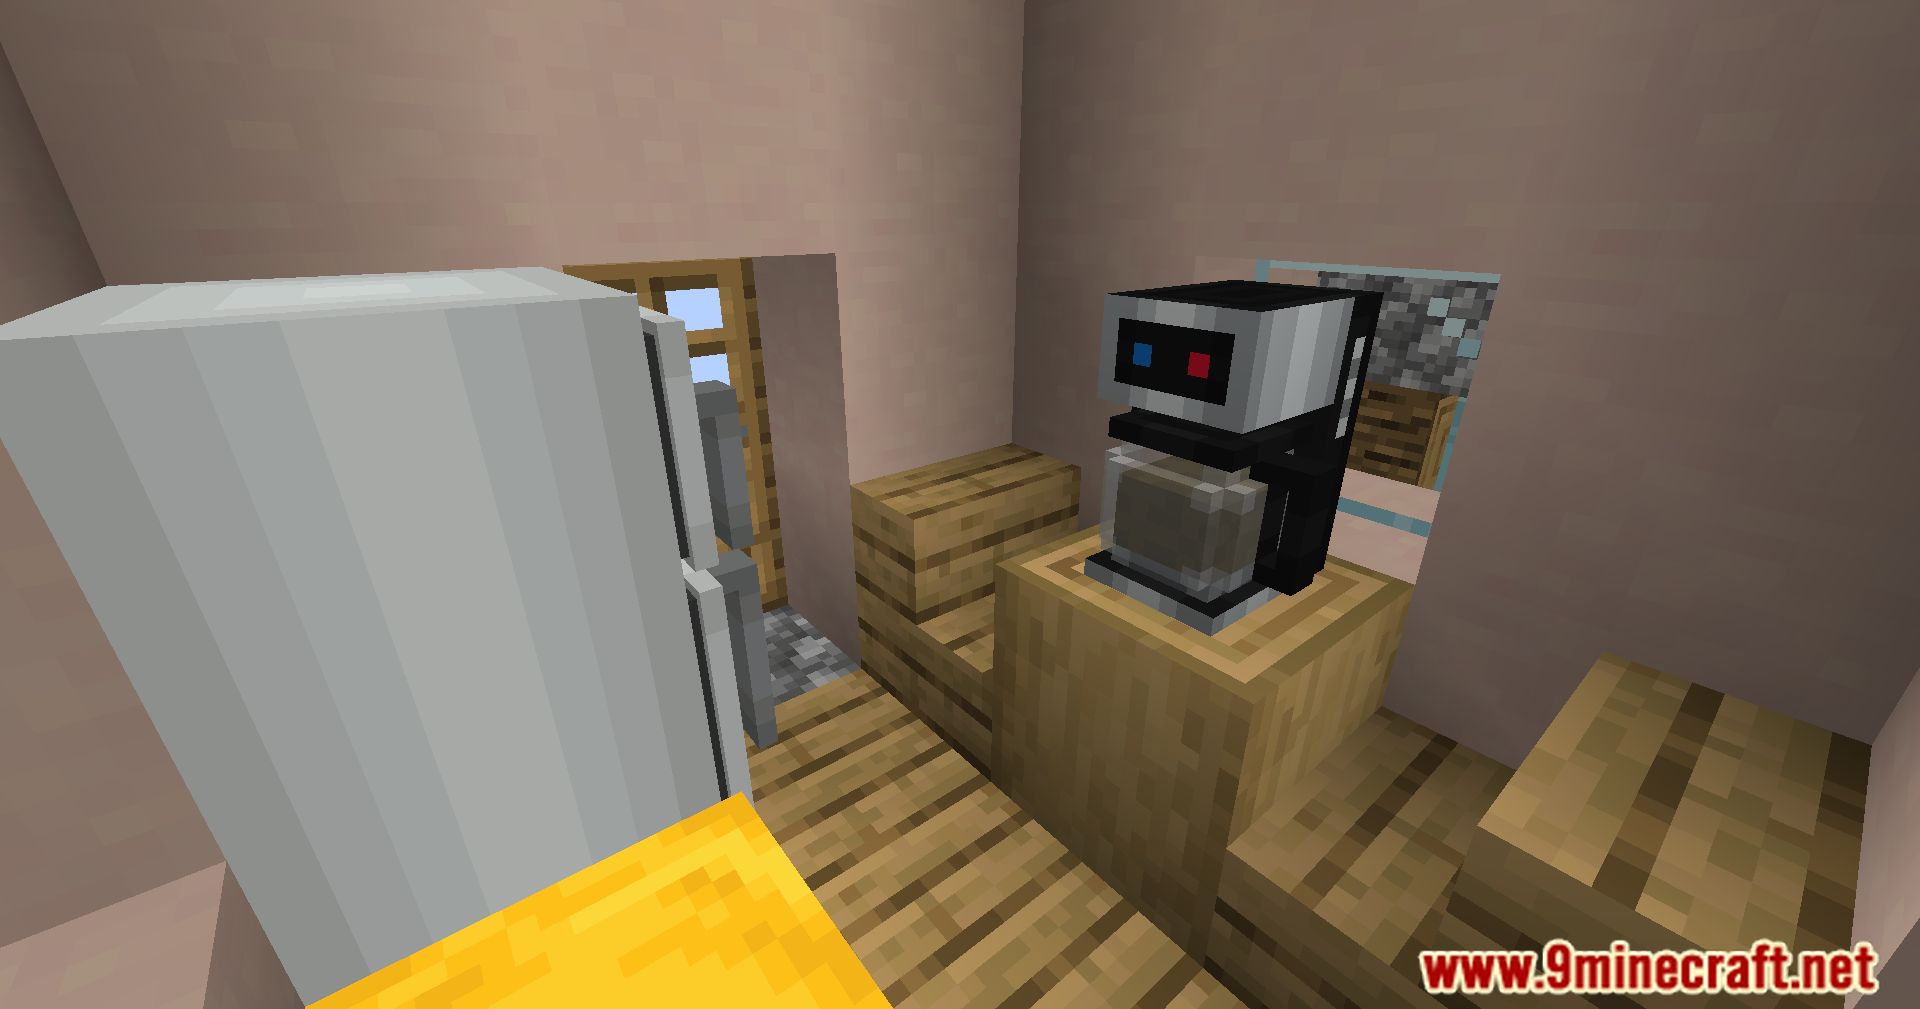 Moa Decor Cookery Mod (1.20.1, 1.19.4) - Infuse Artistic Flair Into Your Minecraft World! 8